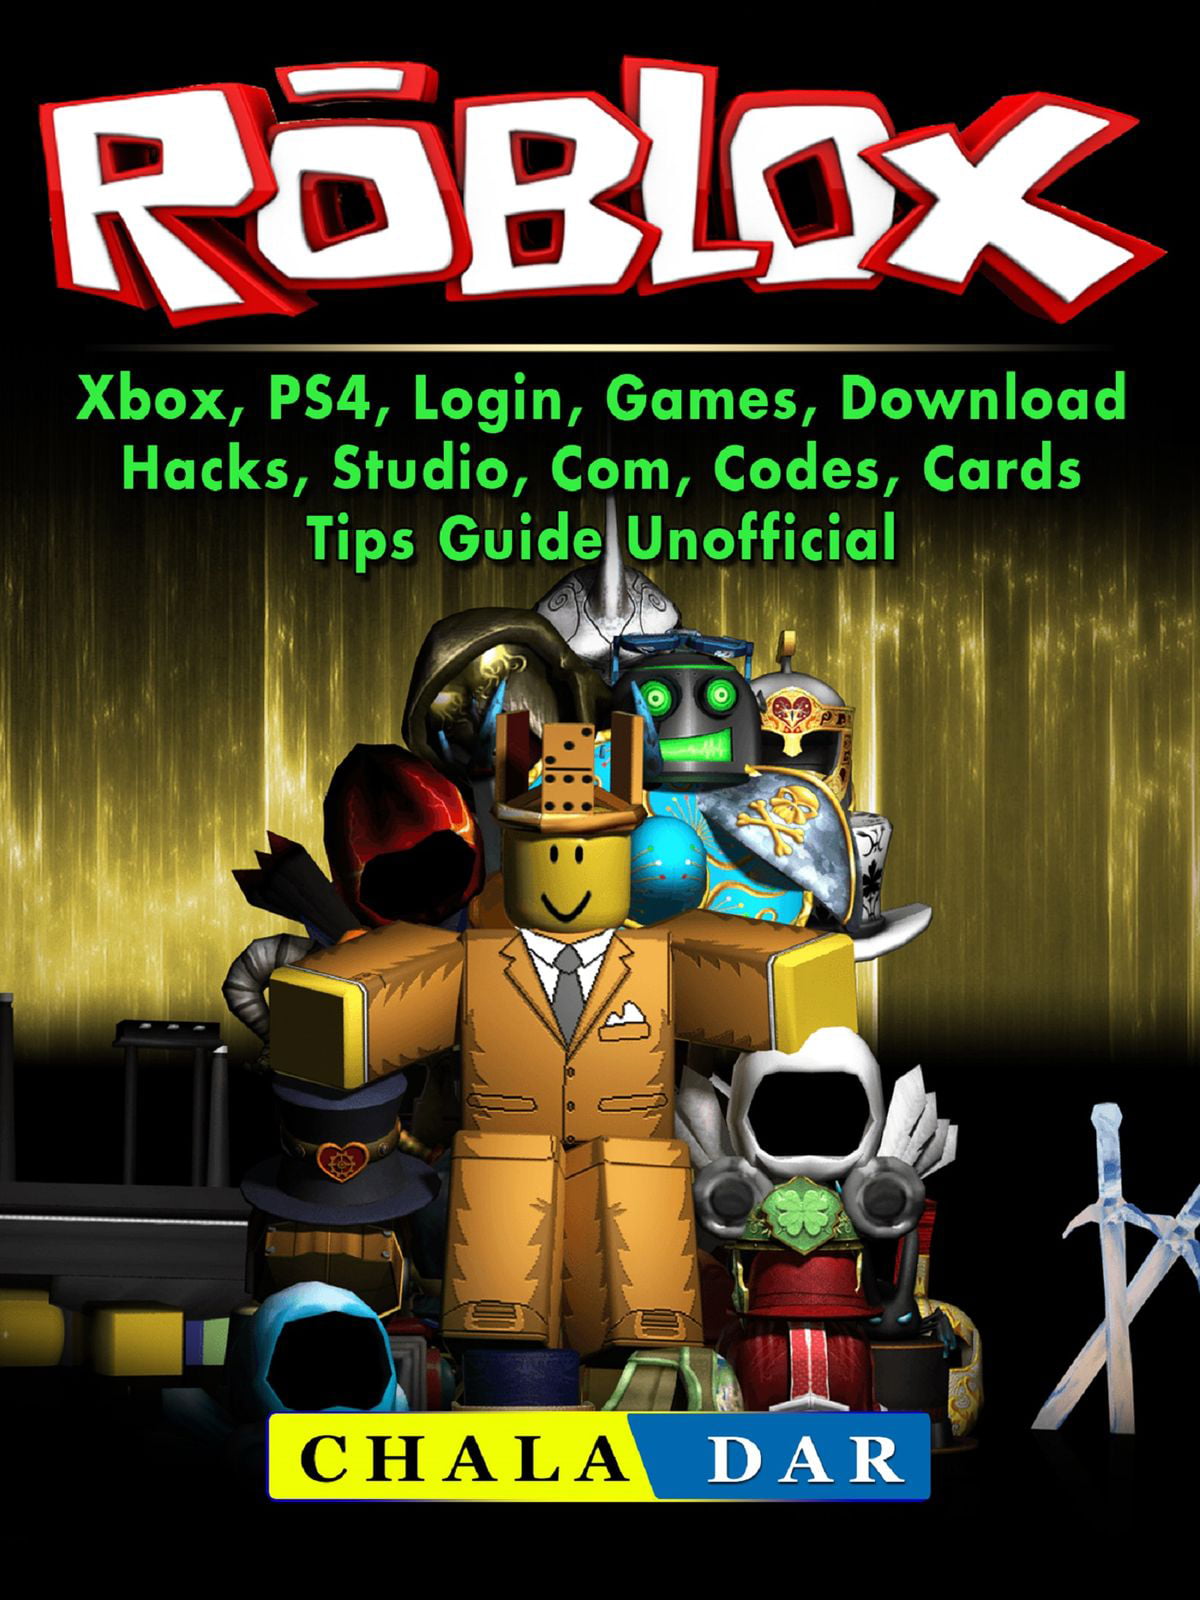 How To Buy Roblox On Ps4